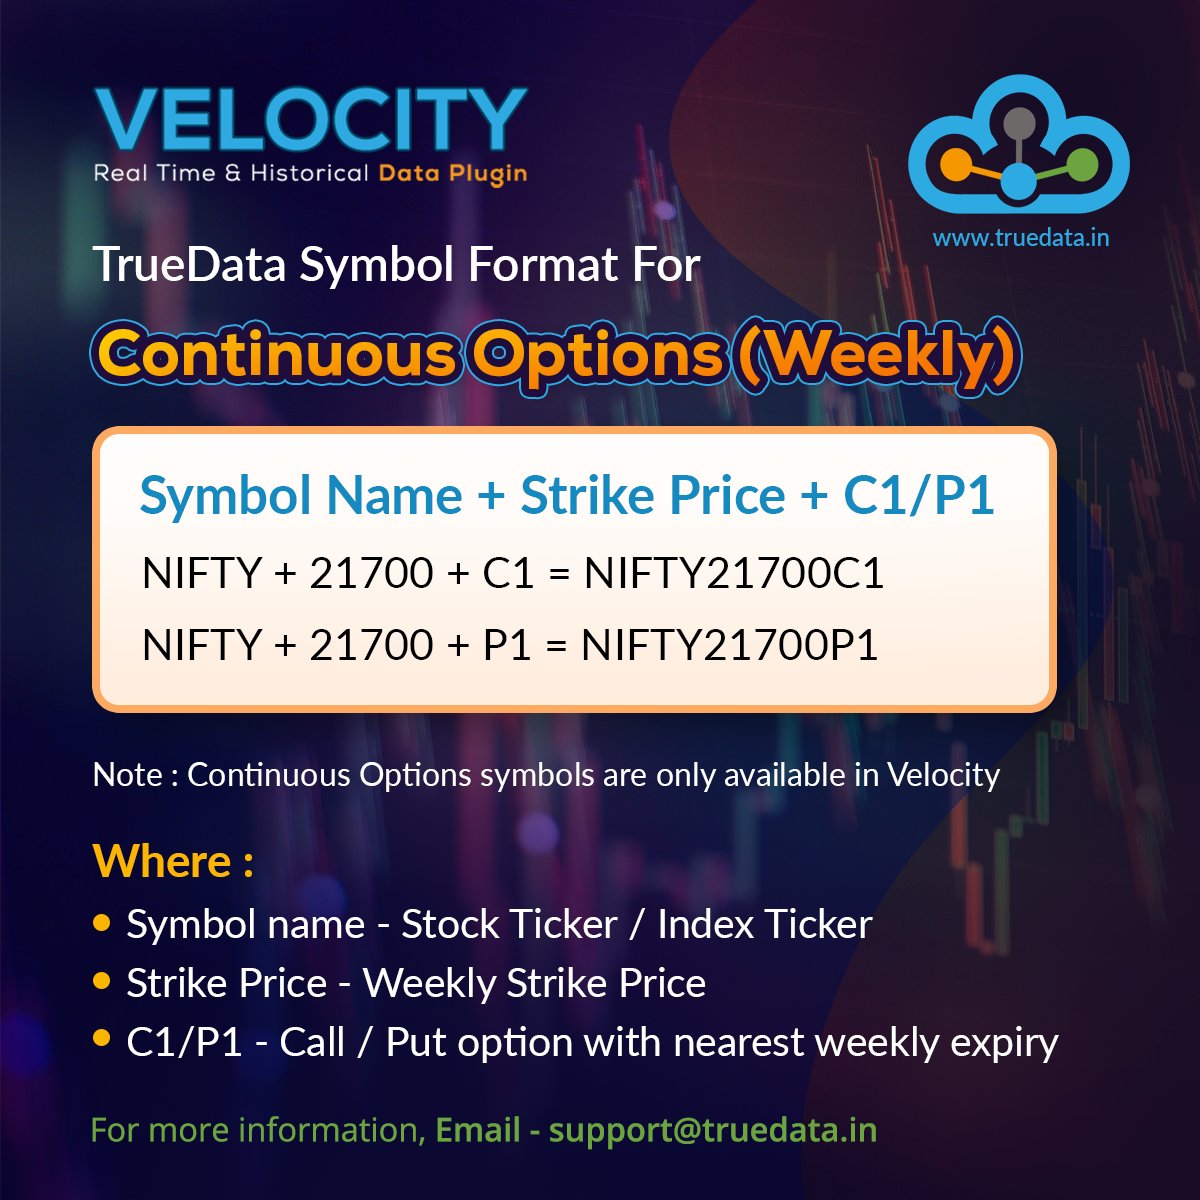 Truedata symbol format for Continuous Options (Weekly)
Symbol Name + Strike Price + C1/P1
NIFTY + 21700 + C1 NIFTY21700C1
NIFTY + 21700+ P1 = NIFTY21700P1

💁‍♂️ For more info Visit : bit.ly/3ydCzcO

#truedata #Velocity #RealTimeData #continuousoptions #nifty